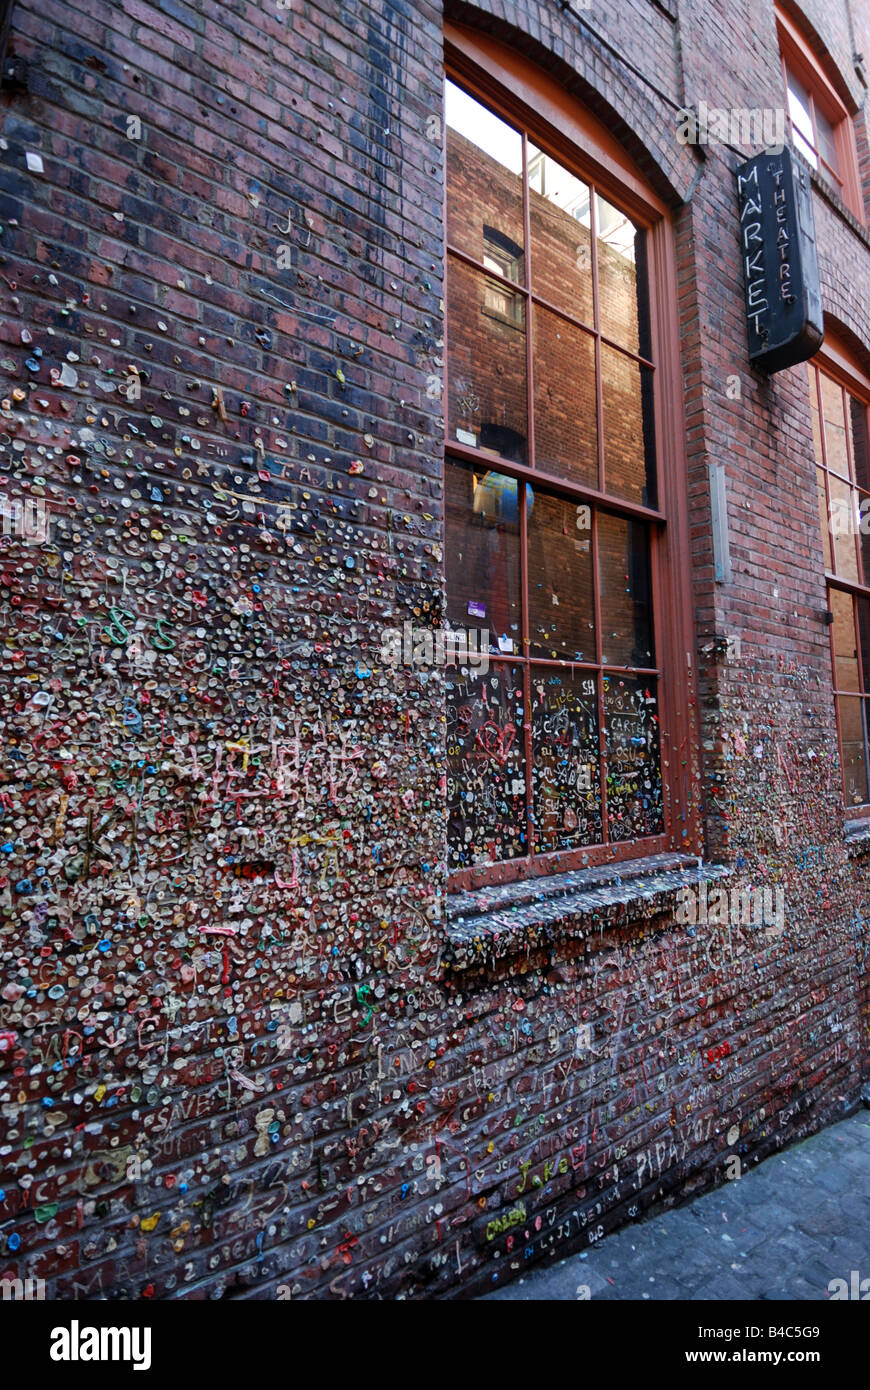 The Gum Wall at Pike Place Market in Seattle, Washington. Stock Photo